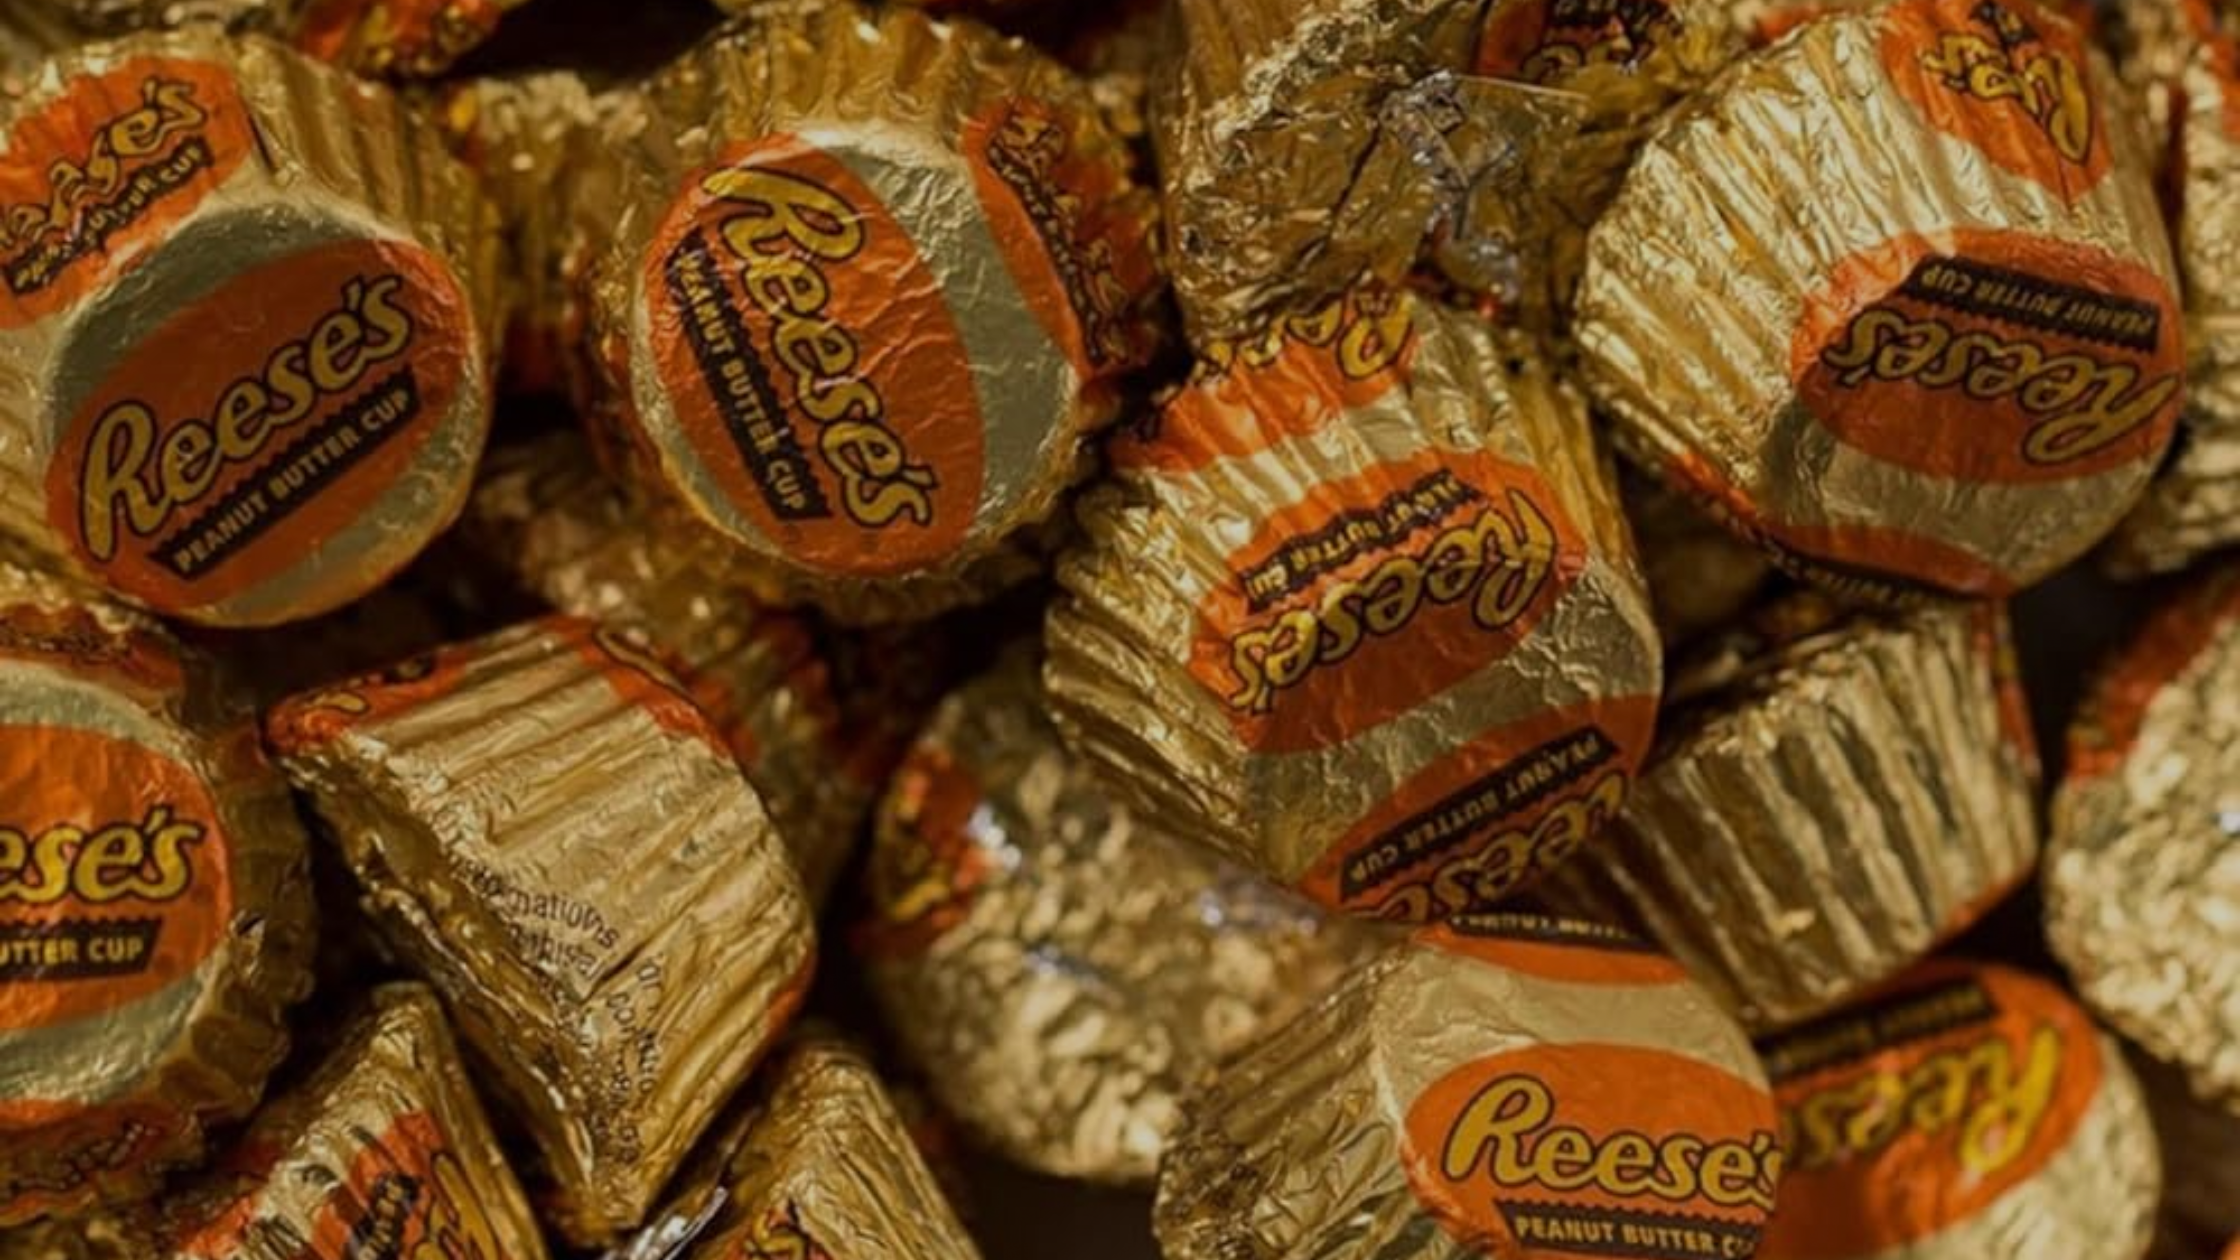 Try These Top 20 Reese’s Products Before It’s Too Late